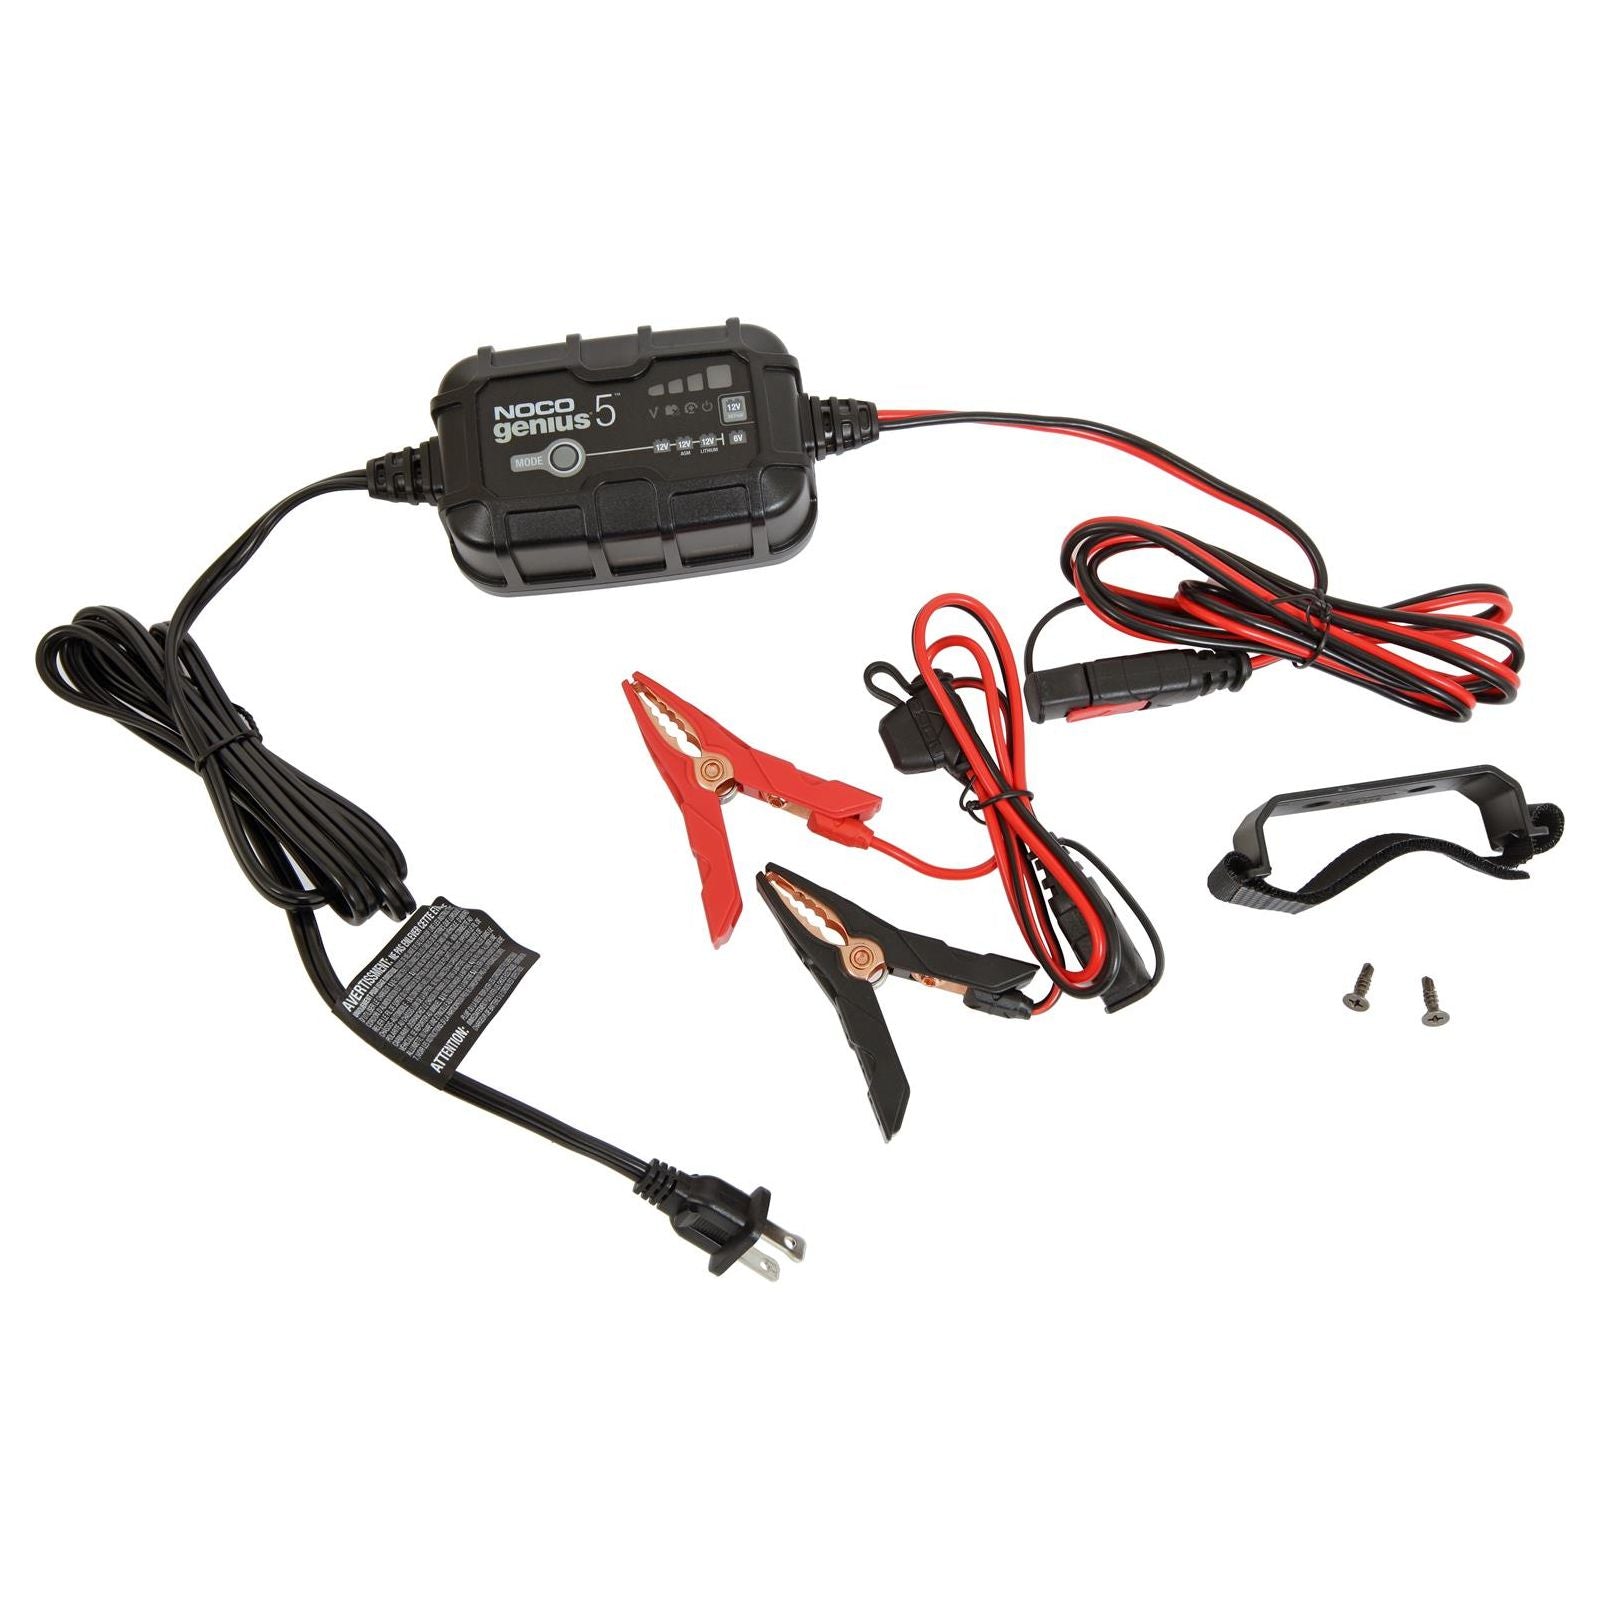 NOCO 5 Amps Battery Charger and Maintainer GENIUS5